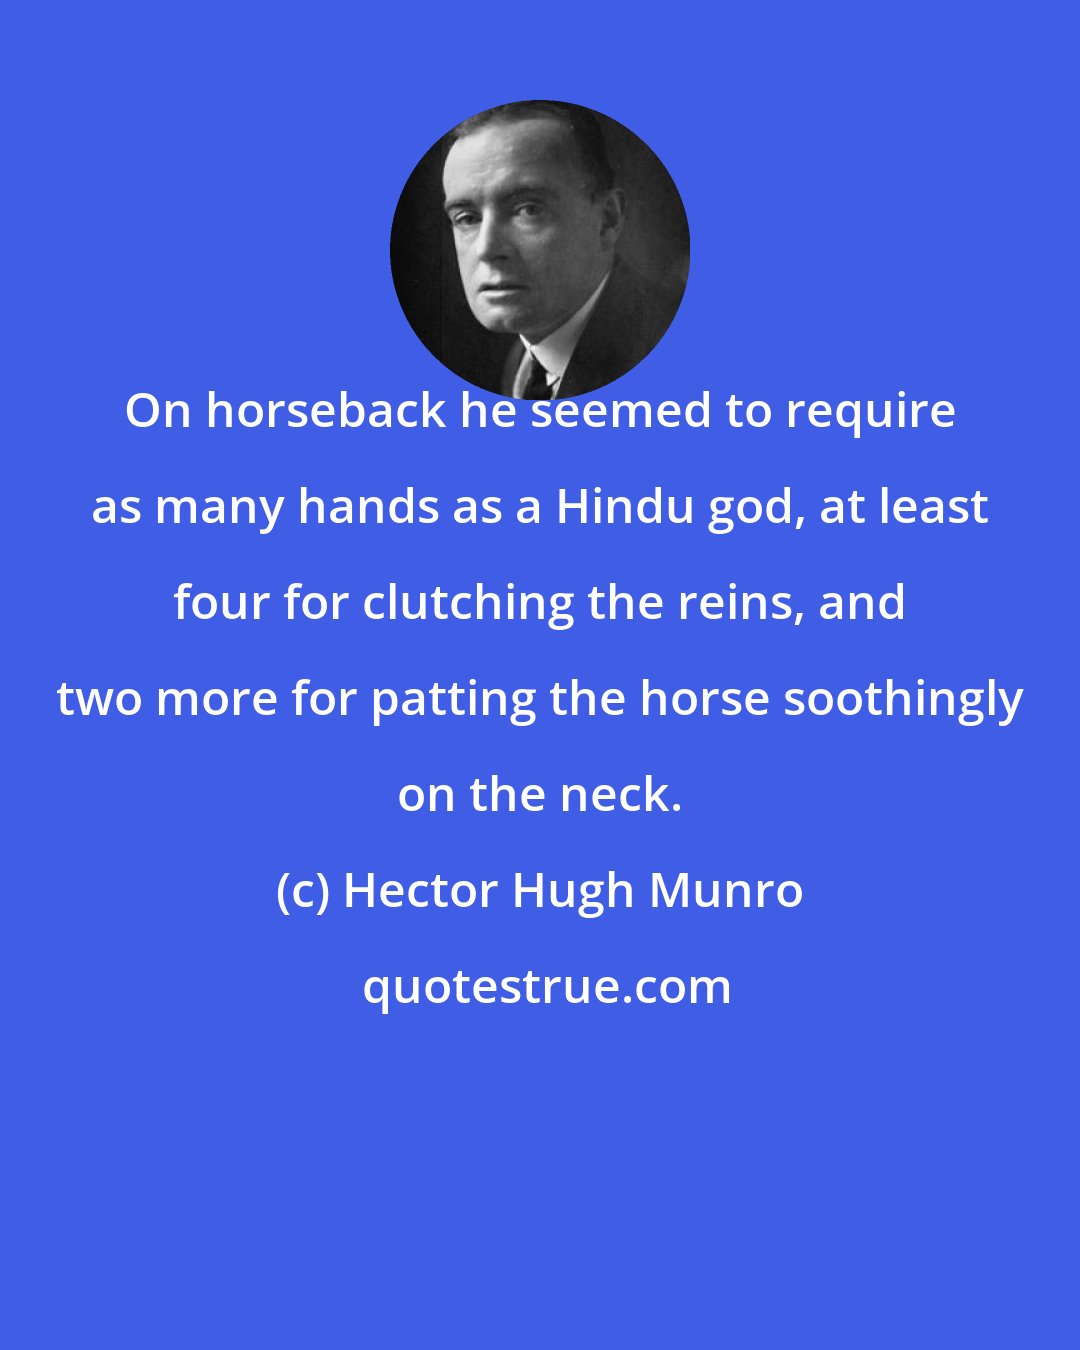 Hector Hugh Munro: On horseback he seemed to require as many hands as a Hindu god, at least four for clutching the reins, and two more for patting the horse soothingly on the neck.